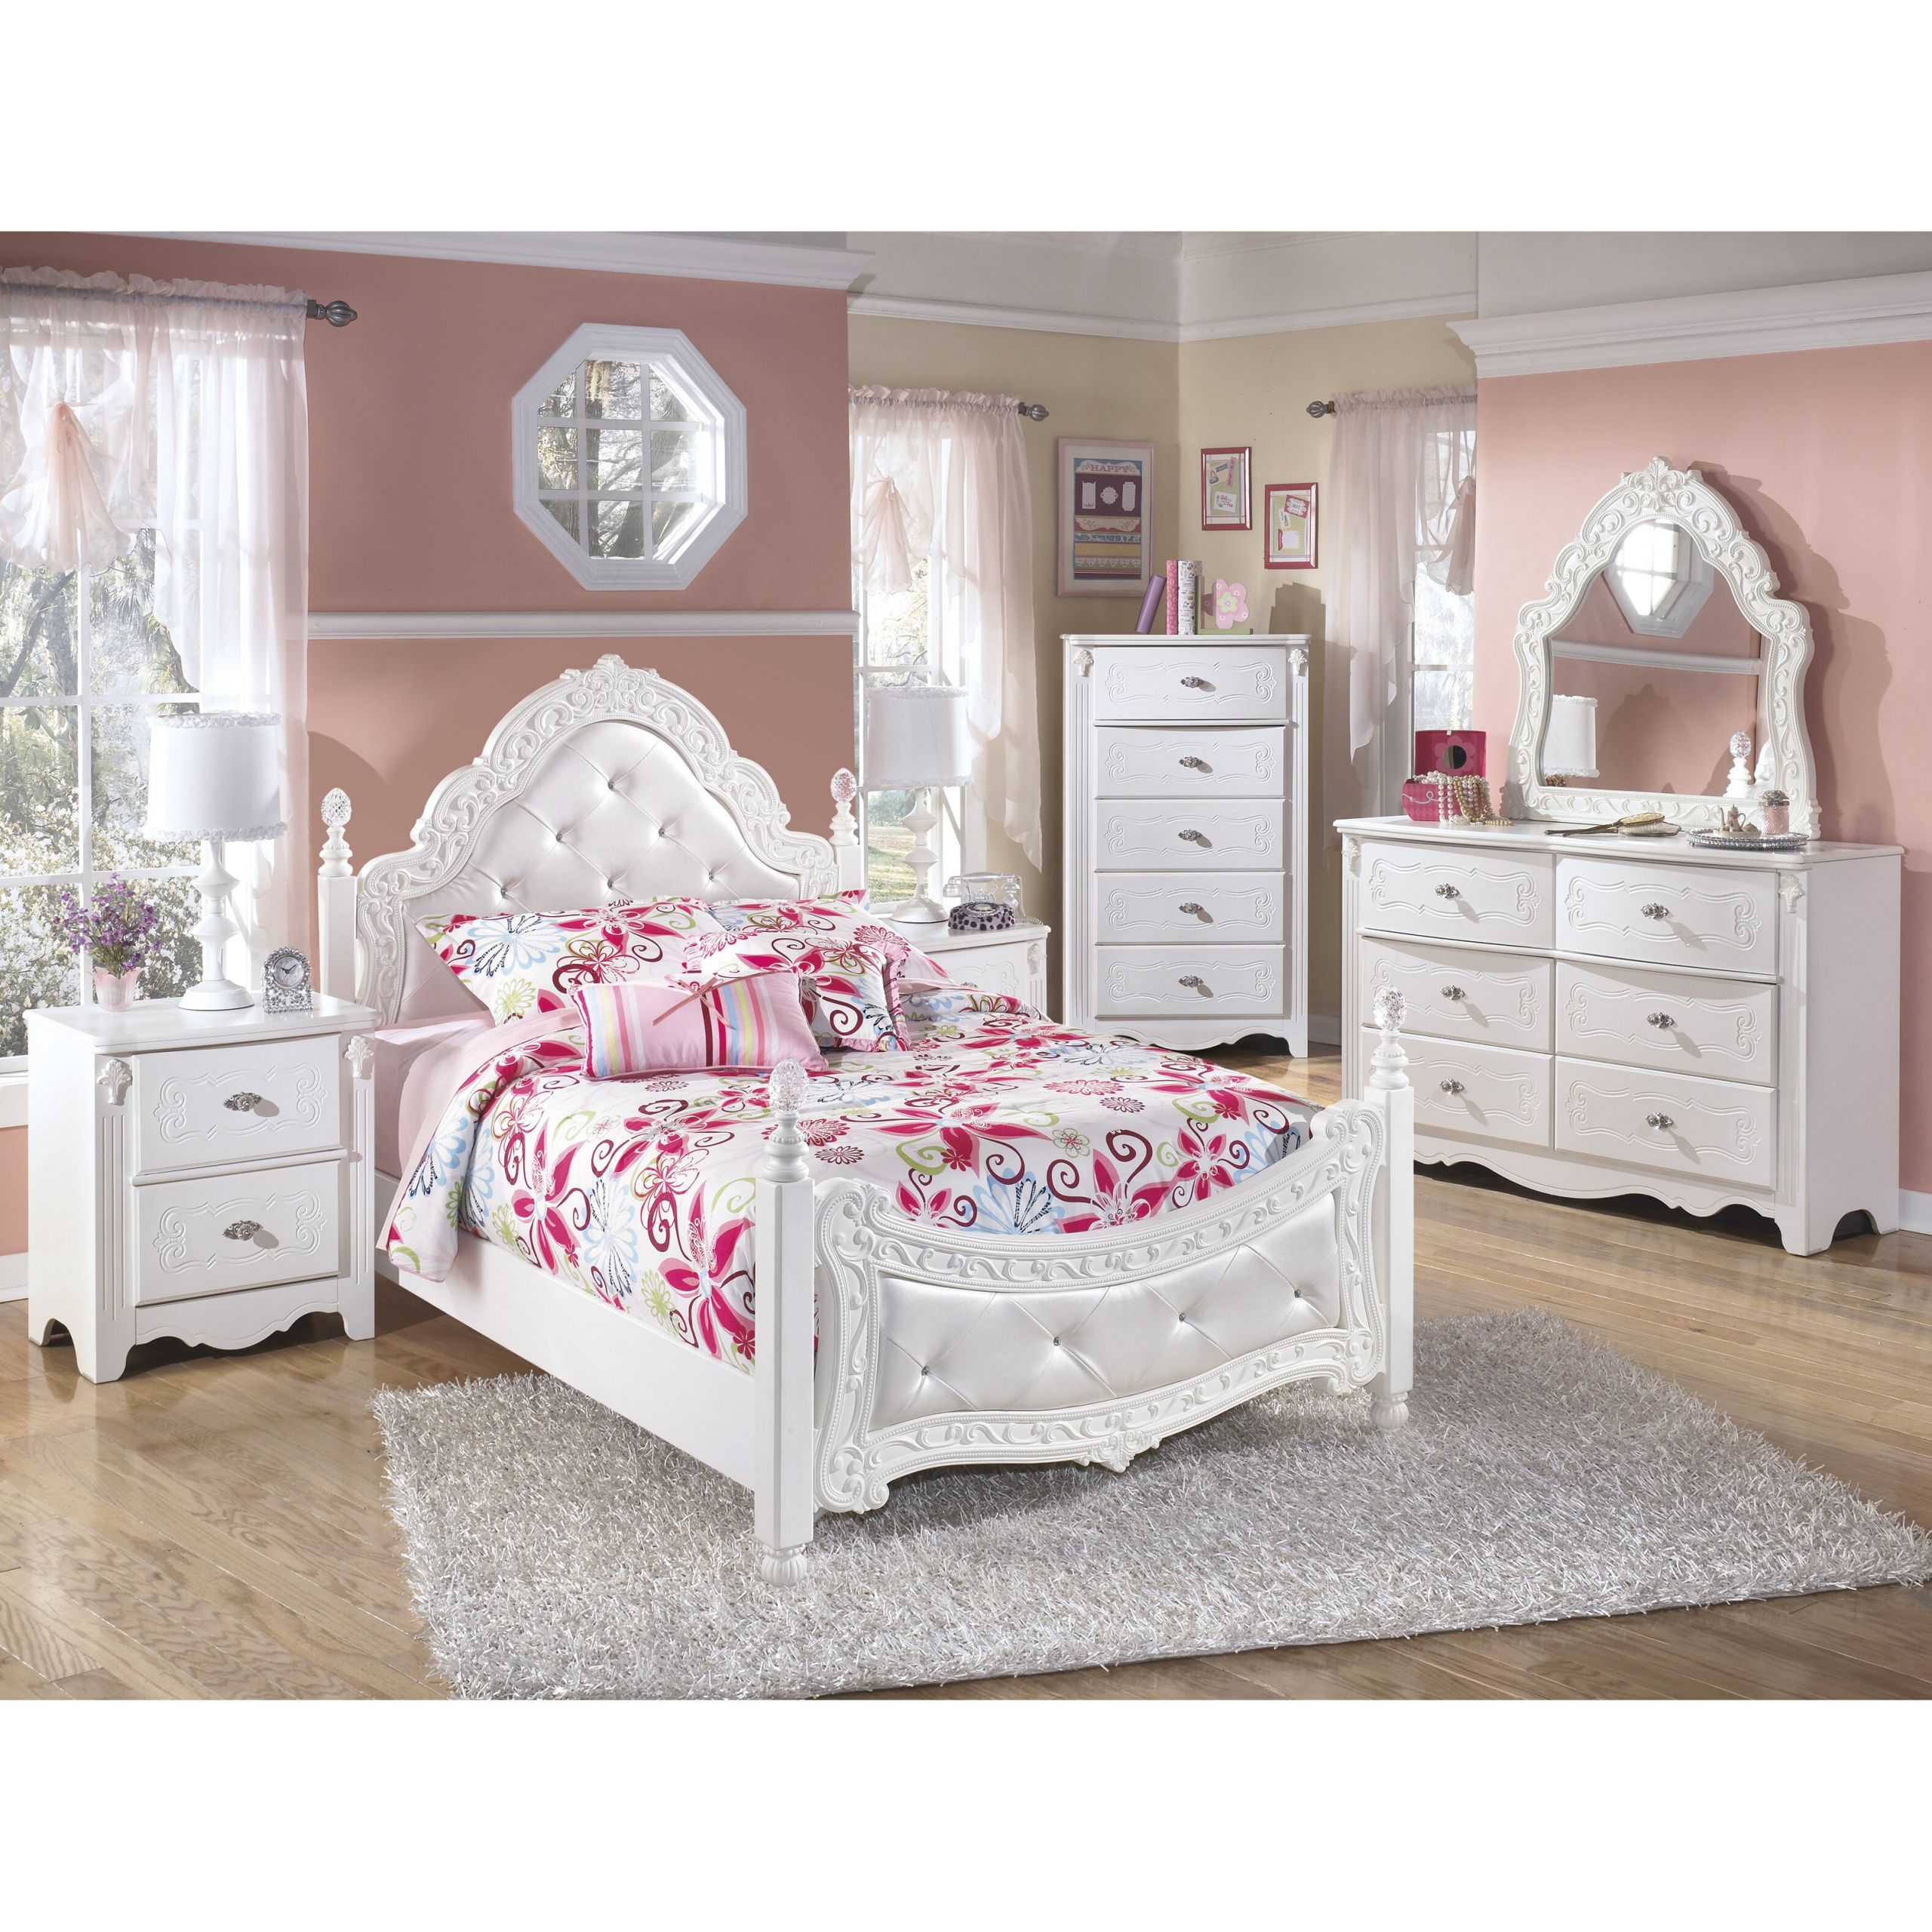 Wayfair Kids Room
 Signature Design by Ashley Exquisite Four Poster